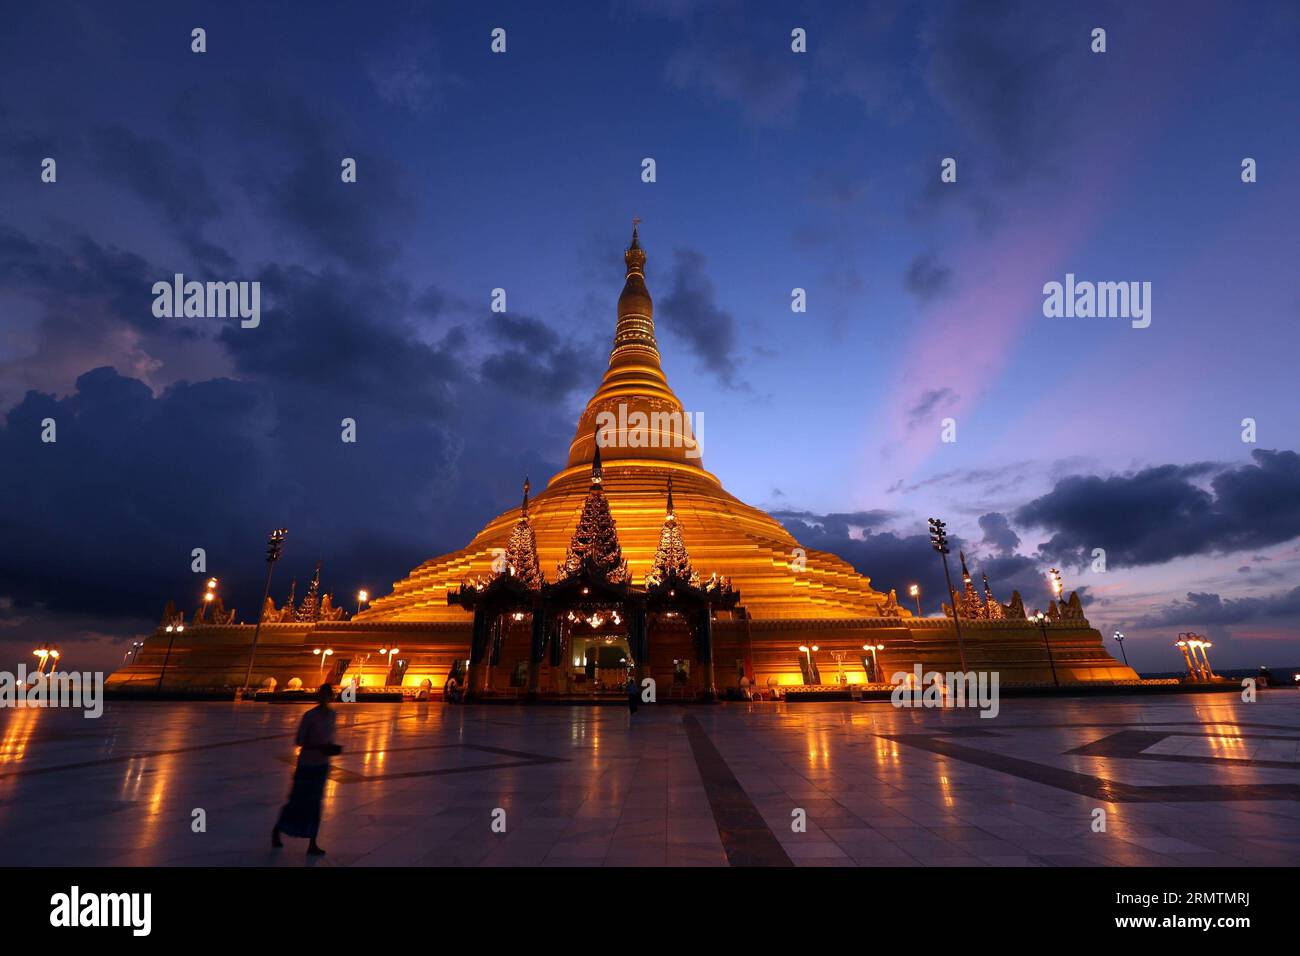 (140912) -- NAY PYI TAW, Sept. 12 -- Photo taken on Sept. 11, 2014 shows a view of the Uppatasanti Pagoda in Nay Pyi Taw, Myanmar. Uppatasanti Pagoda is a prominent landmark in the Burmese capital of Naypyidaw. The pagoda, which houses a Buddha tooth relic from China, is a 325-feet tall replica of Shwedagon Pagoda in Yangon. ) MYANMAR-NAY PYI TAW-UPPATASANTI PAGODA UxAung PUBLICATIONxNOTxINxCHN   Nay Pyi Taw Sept 12 Photo Taken ON Sept 11 2014 Shows a View of The Uppatasanti Pagoda in Nay Pyi Taw Myanmar Uppatasanti Pagoda IS a Prominent Landmark in The Burmese Capital of Naypyidaw The Pagoda Stock Photo